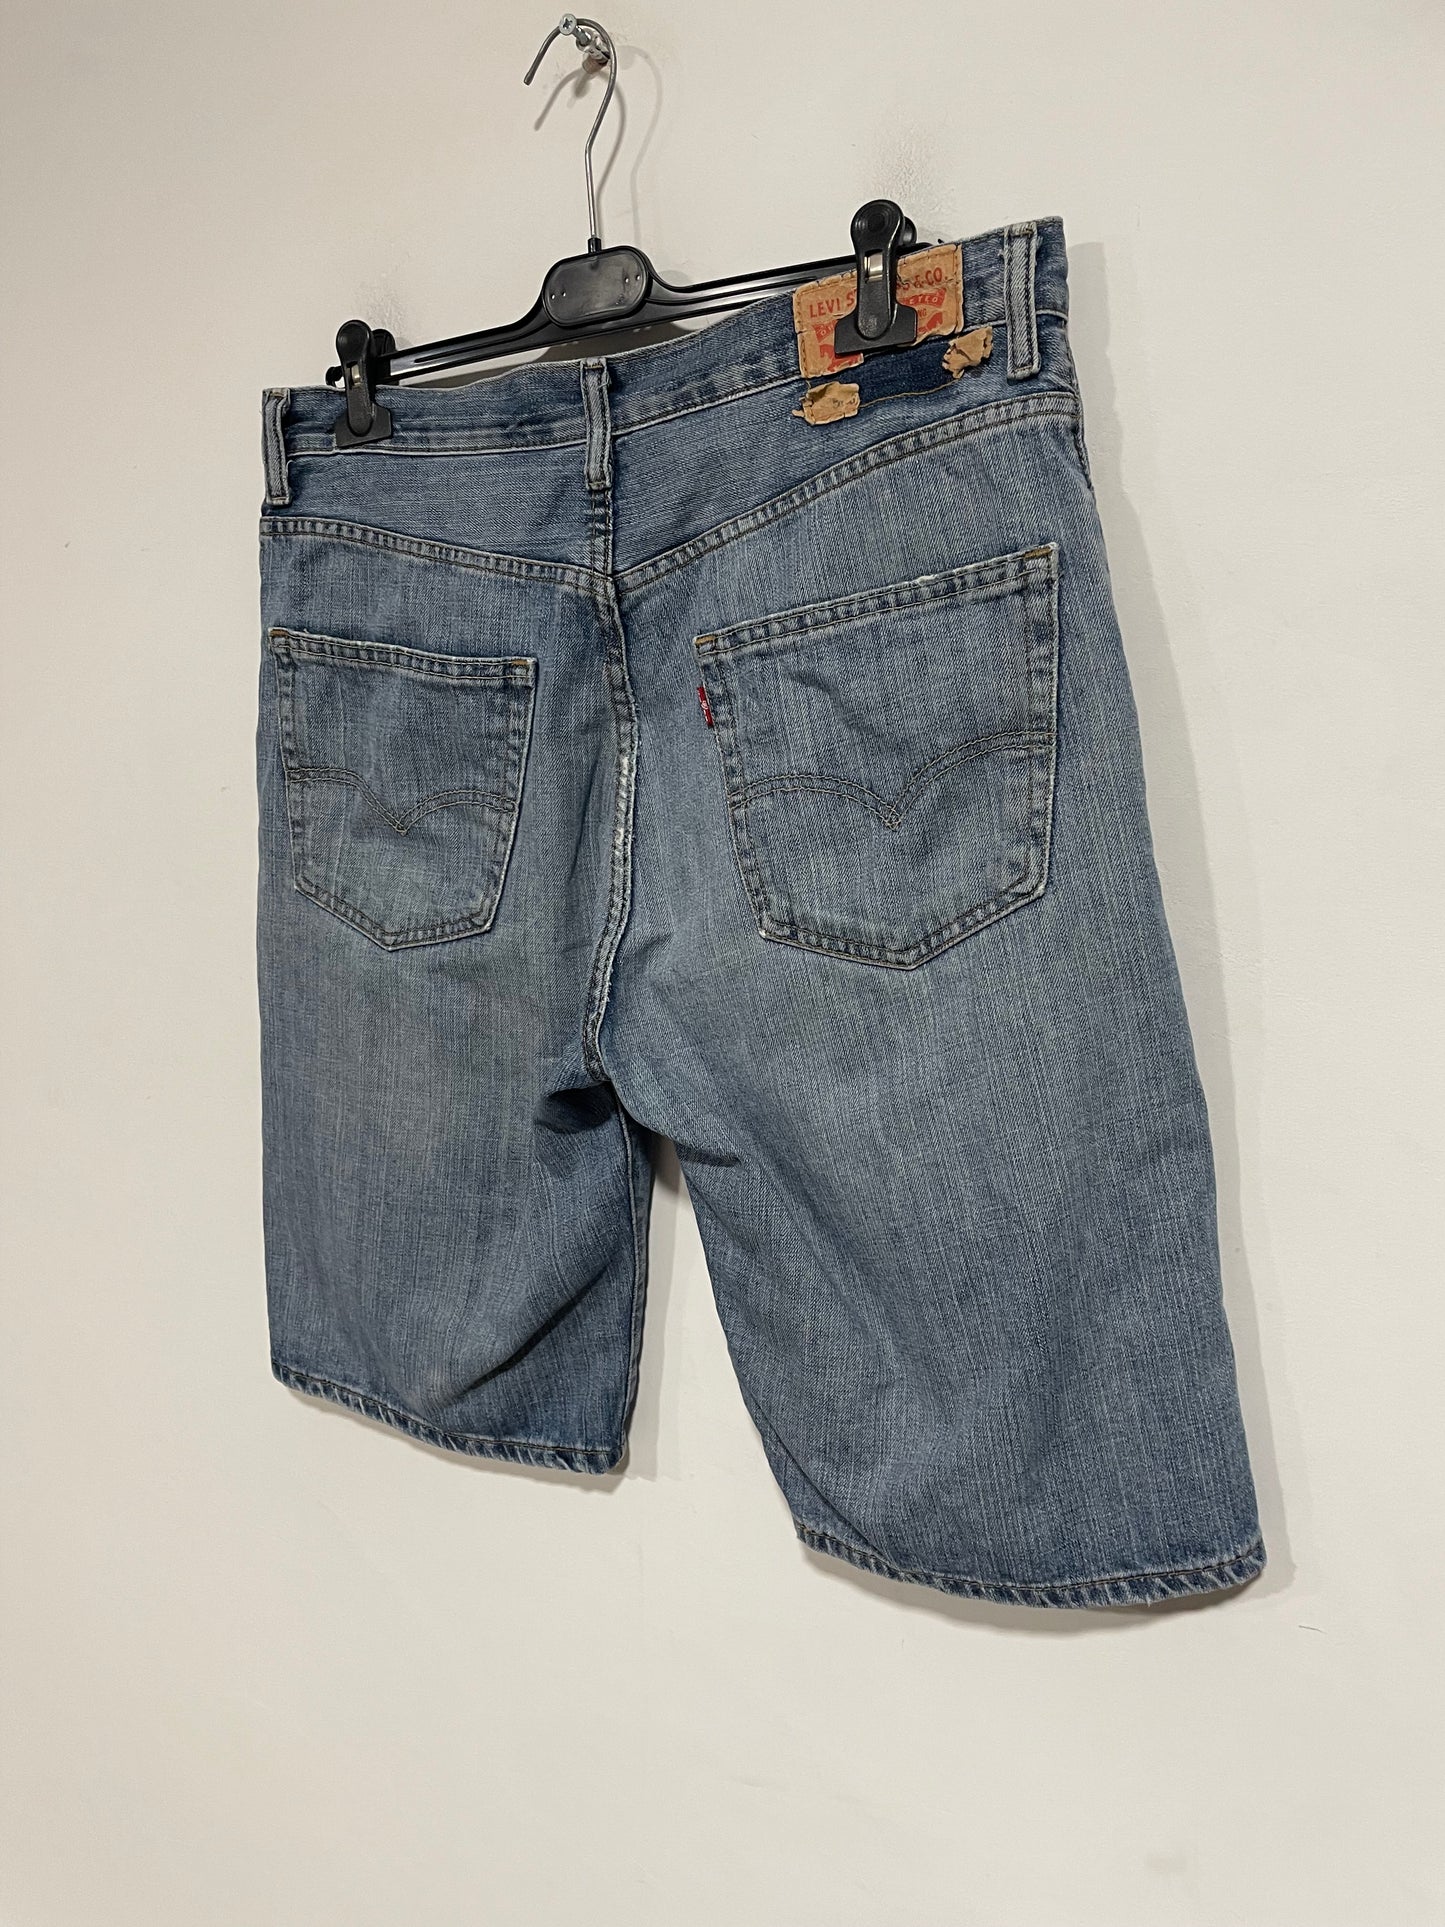 Shorts Levi’s 569 in jeans (D809)